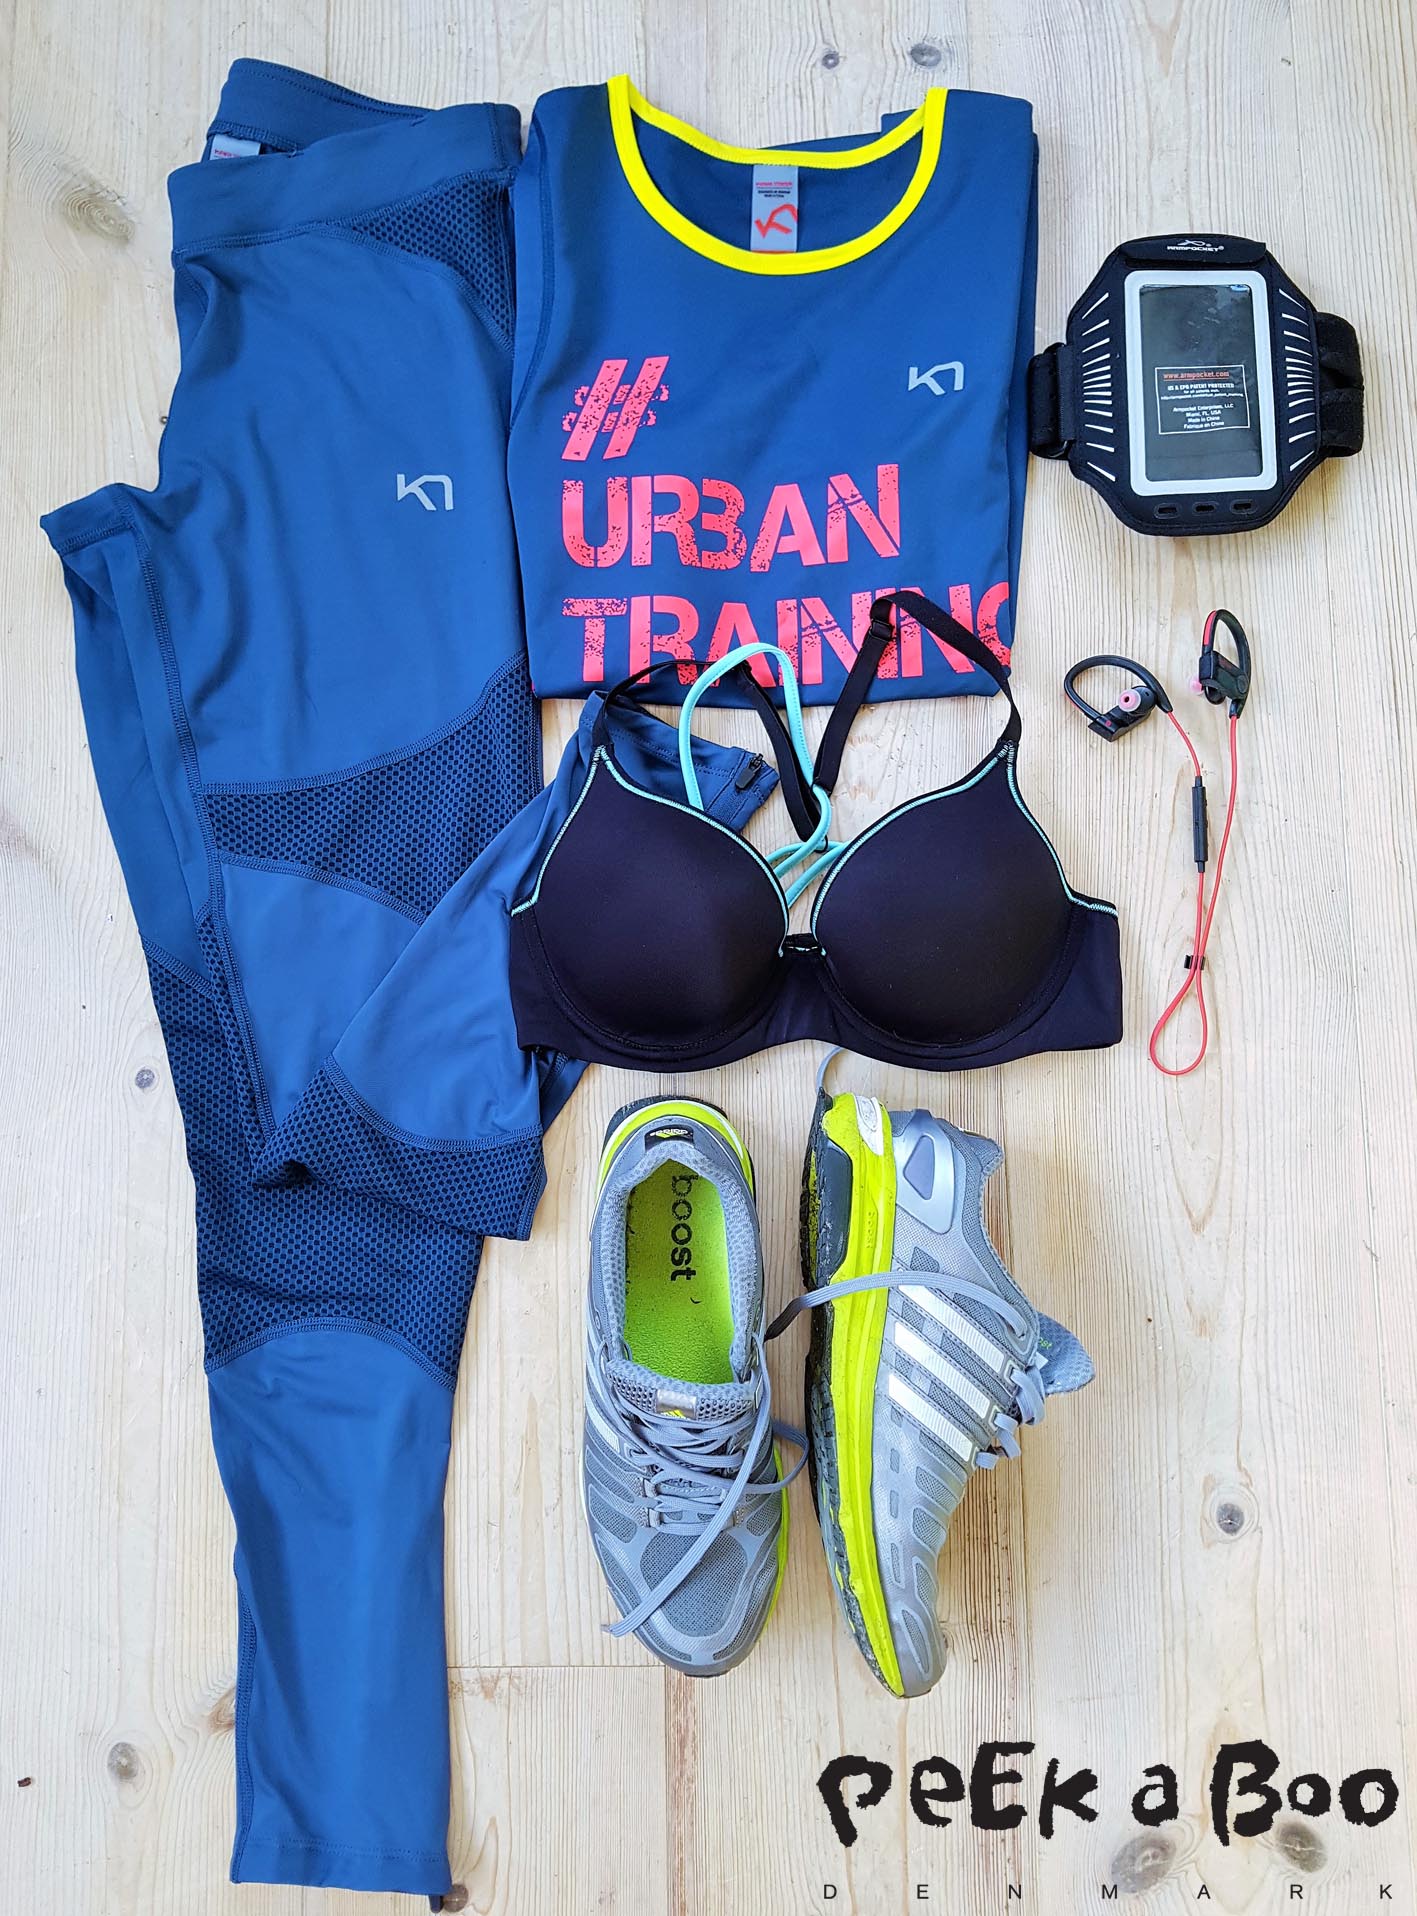 Todays training gear. Top and leggings from Kari Traa, bra from Casall, sneakers from Adidas boost, arm pocket for my Samsung 7 edge from Armpocket and when I run alone I can't run without music in my ears and for this I use wireless headset  from Jabra Sports pace. 